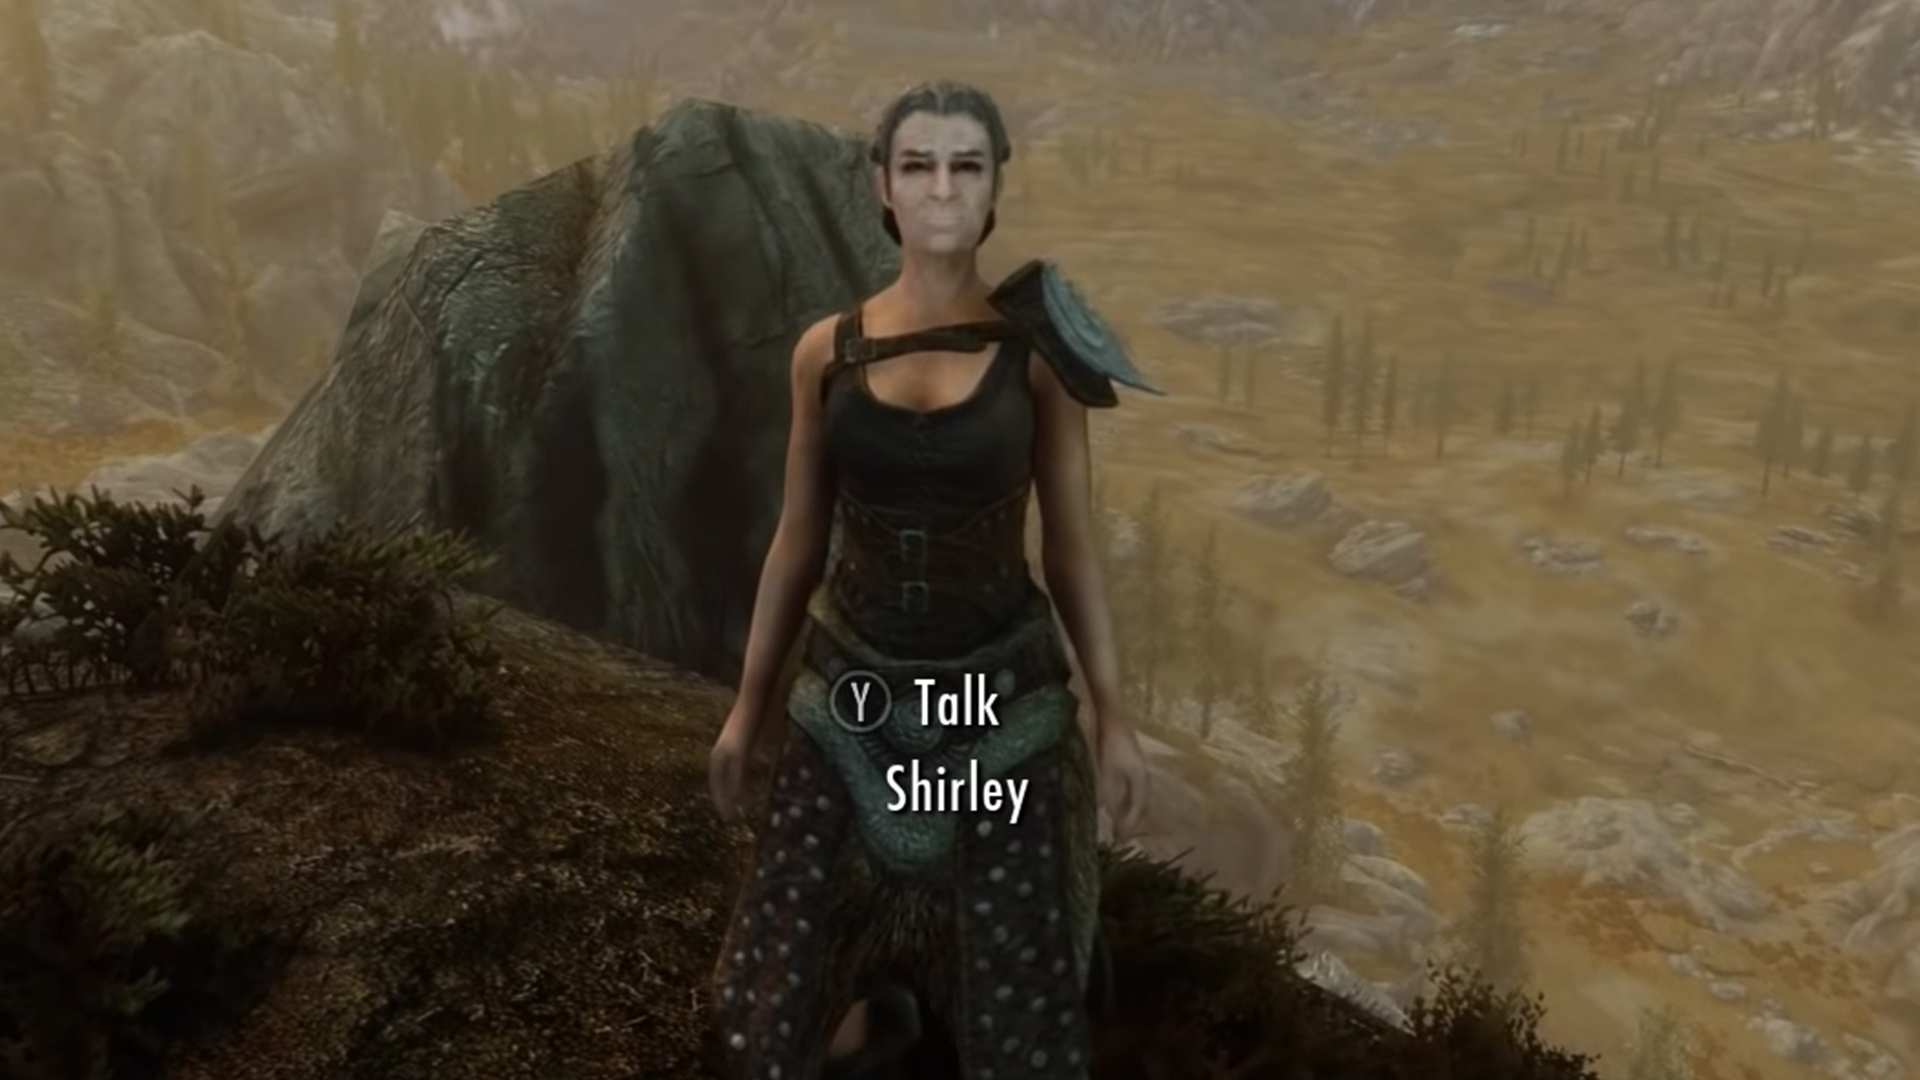 Skyrim Grandma takes time off for her health after negative YouTube comments thumbnail